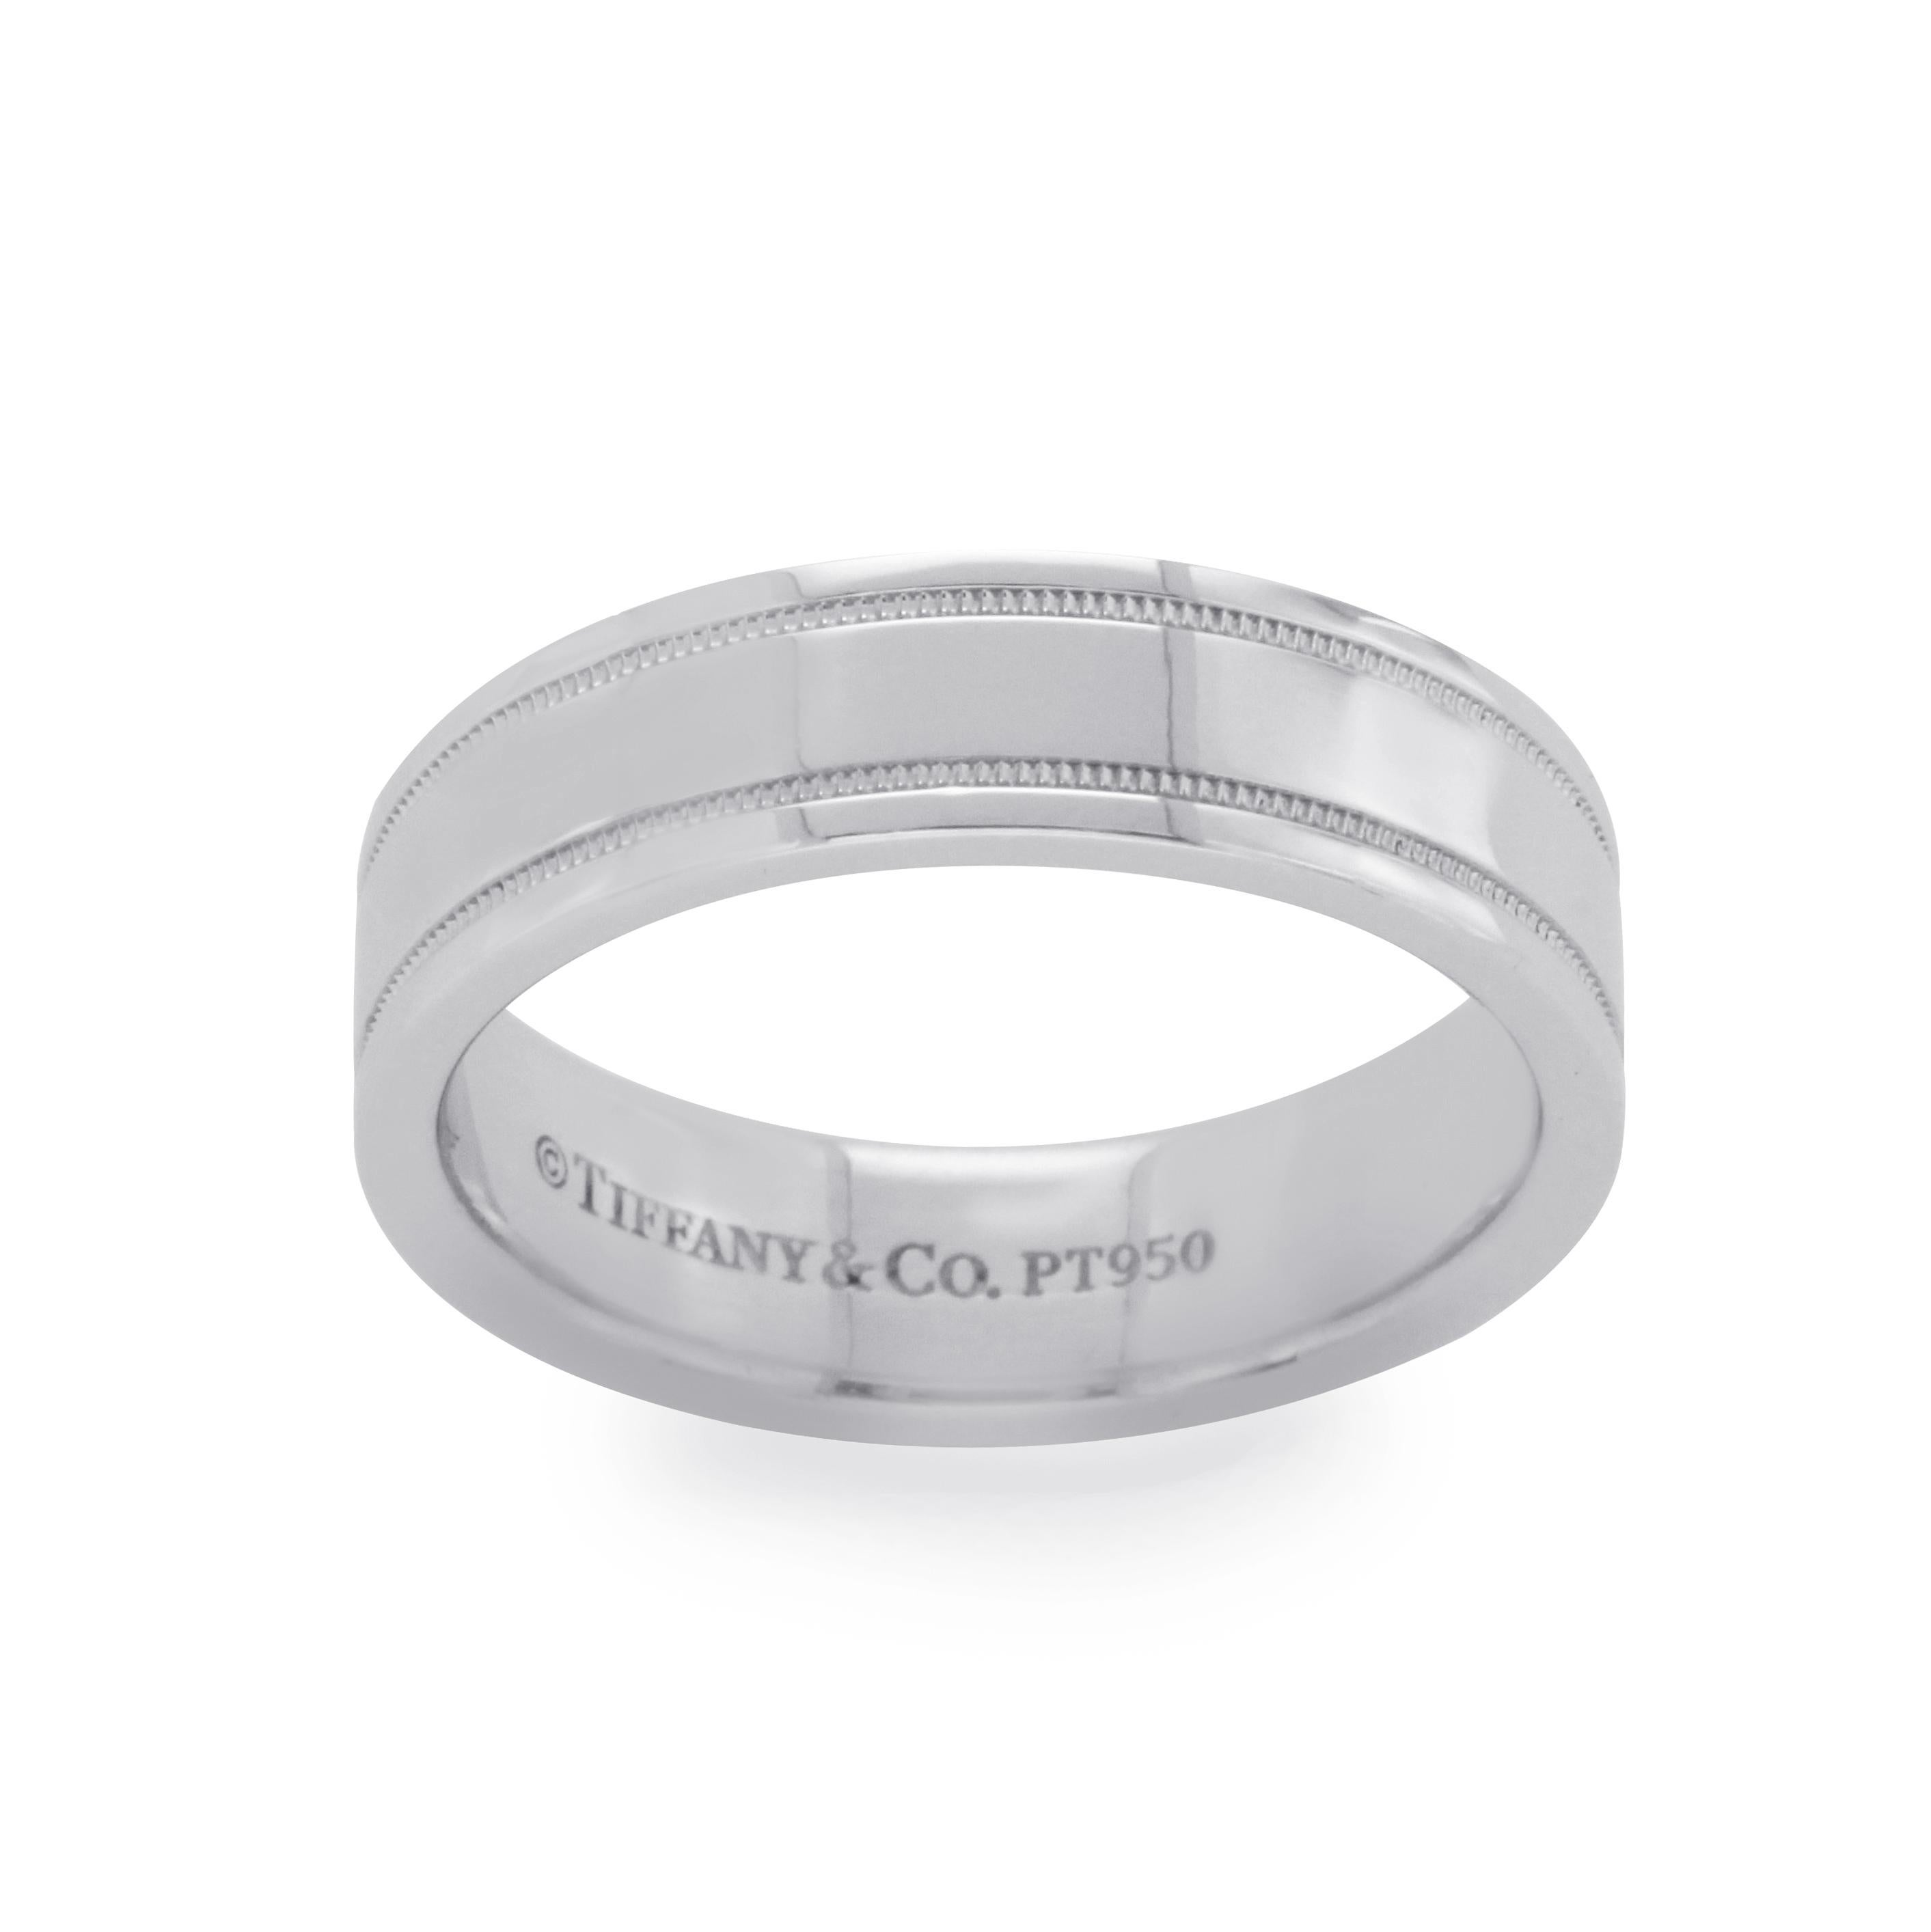 Type: Ring
Top: 6 mm 
Band Width: 6 mm
Metal: Platinum
Metal Purity: 950
Hallmarks: Tiffany & Co PT 950
Total Weight: 13 Gram
Size: 6.25
Stone Type: None 
Size: 6.25
Stock Number: U420